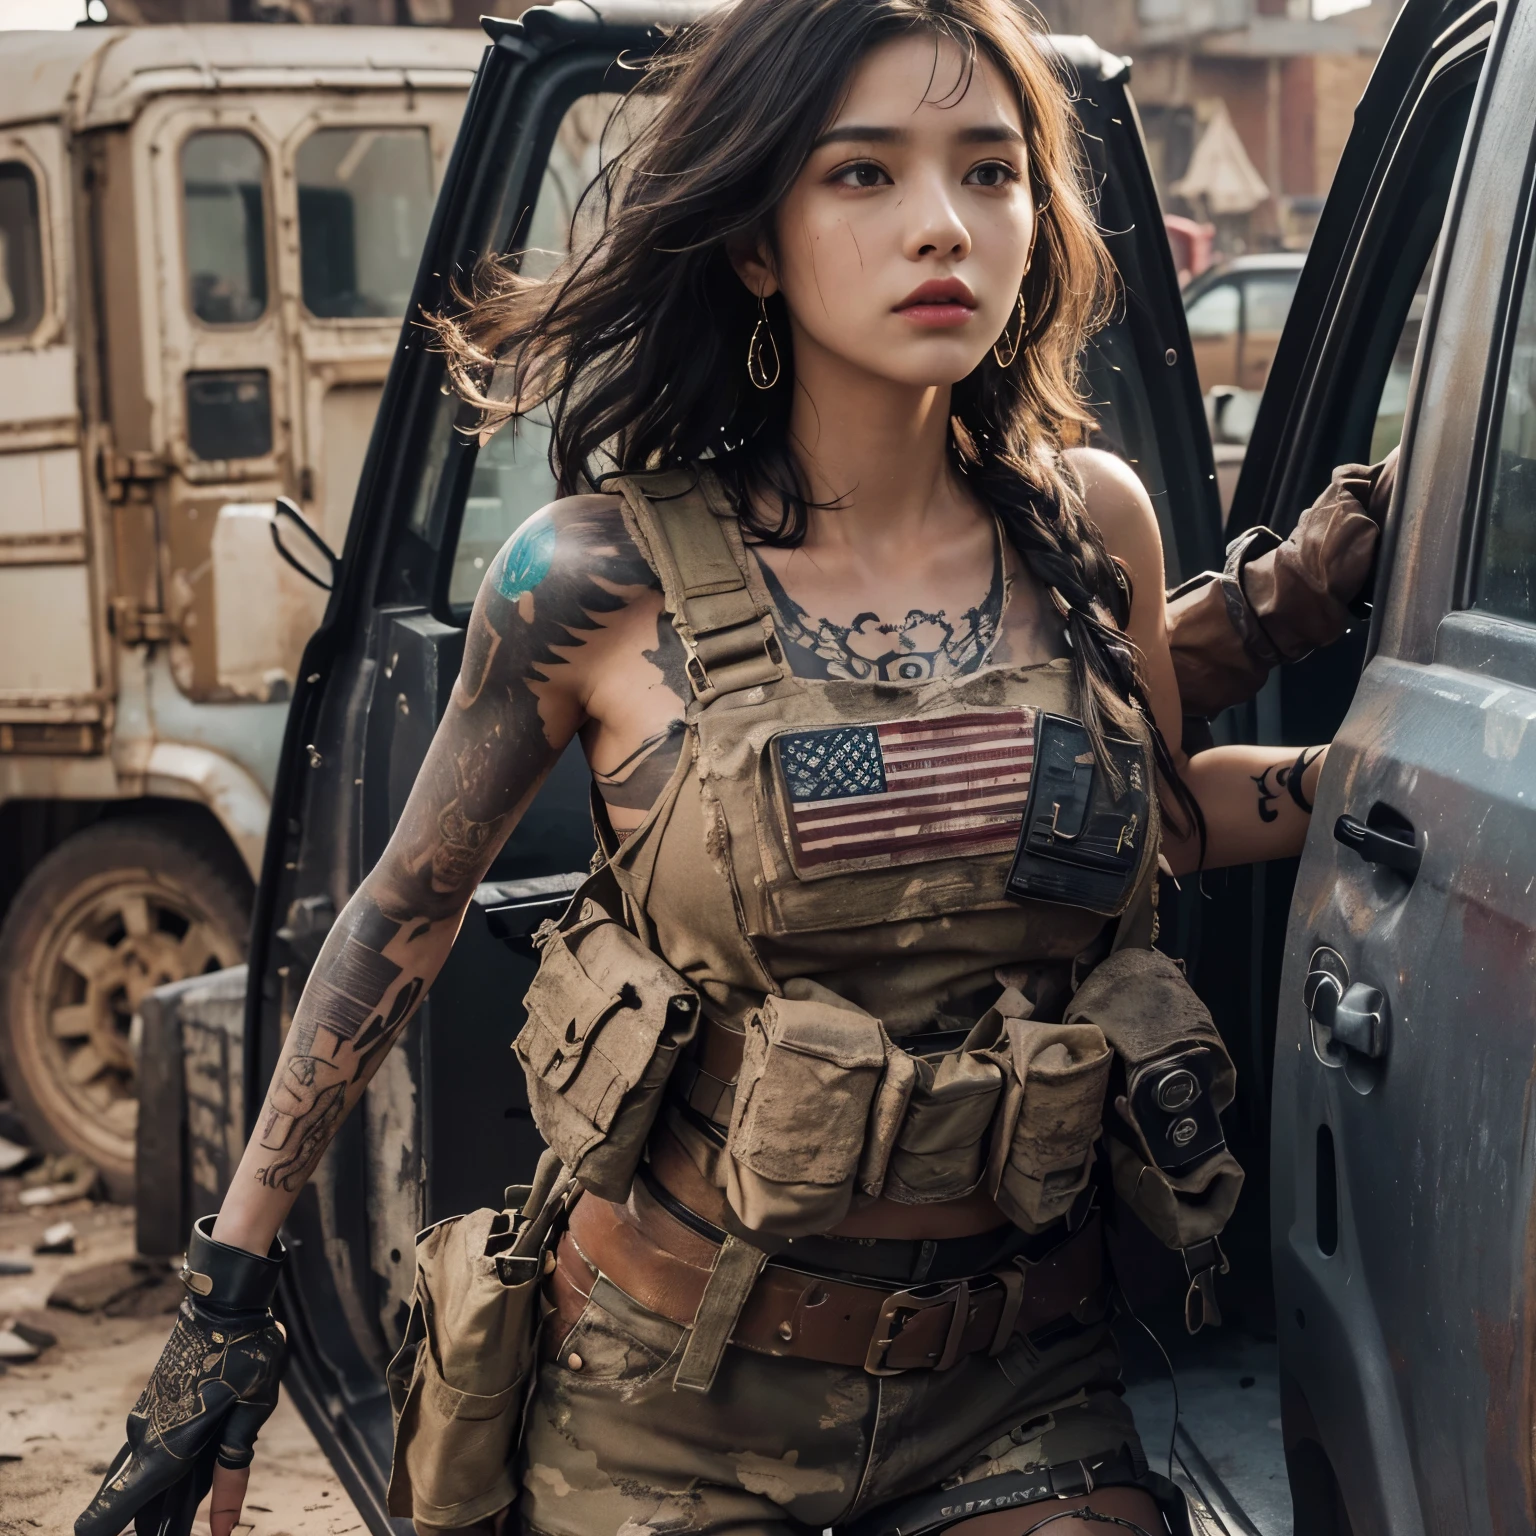 (highres,realistic:1.2),detailed skin texture,automatic rifle,tattoo,woman in a post-apocalyptic wasteland,grim expression,heavy boots,sharp focus,dusty atmosphere,desolate landscape,gritty style,bullet-ridden walls,dark clouds,military attire,bandaged arm,smoke-filled air,fallen debris,scavenging for supplies,gritty urban backdrop,muted color palette,abandoned buildings,weary eyes,armed and dangerous,strong female protagonist.(highest quality,photorealistic:1.37),(realistic,High resolution,super detailed),(tattoo:1.1),(fine skin texture), (bright colors), (soft lighting), (Grunge background), (female model), (close), (colorful ink), (body art), (vibrant tattoos), (intricate design), (dynamic pose), (expressive face), (Elegant attitude), (tattoo artist), (studio setting), (water droplets), (Dripping effect), (wavy hair), (thin line), (shading techniques), (subtle highlights), (glowing skin), (smooth complexion), (depth and dimension), (enchanting eyes), (ornate pattern), (Bold contrast), (varied textures), (meticulous attention to detail), (Artistic expression), (Unique style), (Masterpiece production), (show off your skills and talents)、